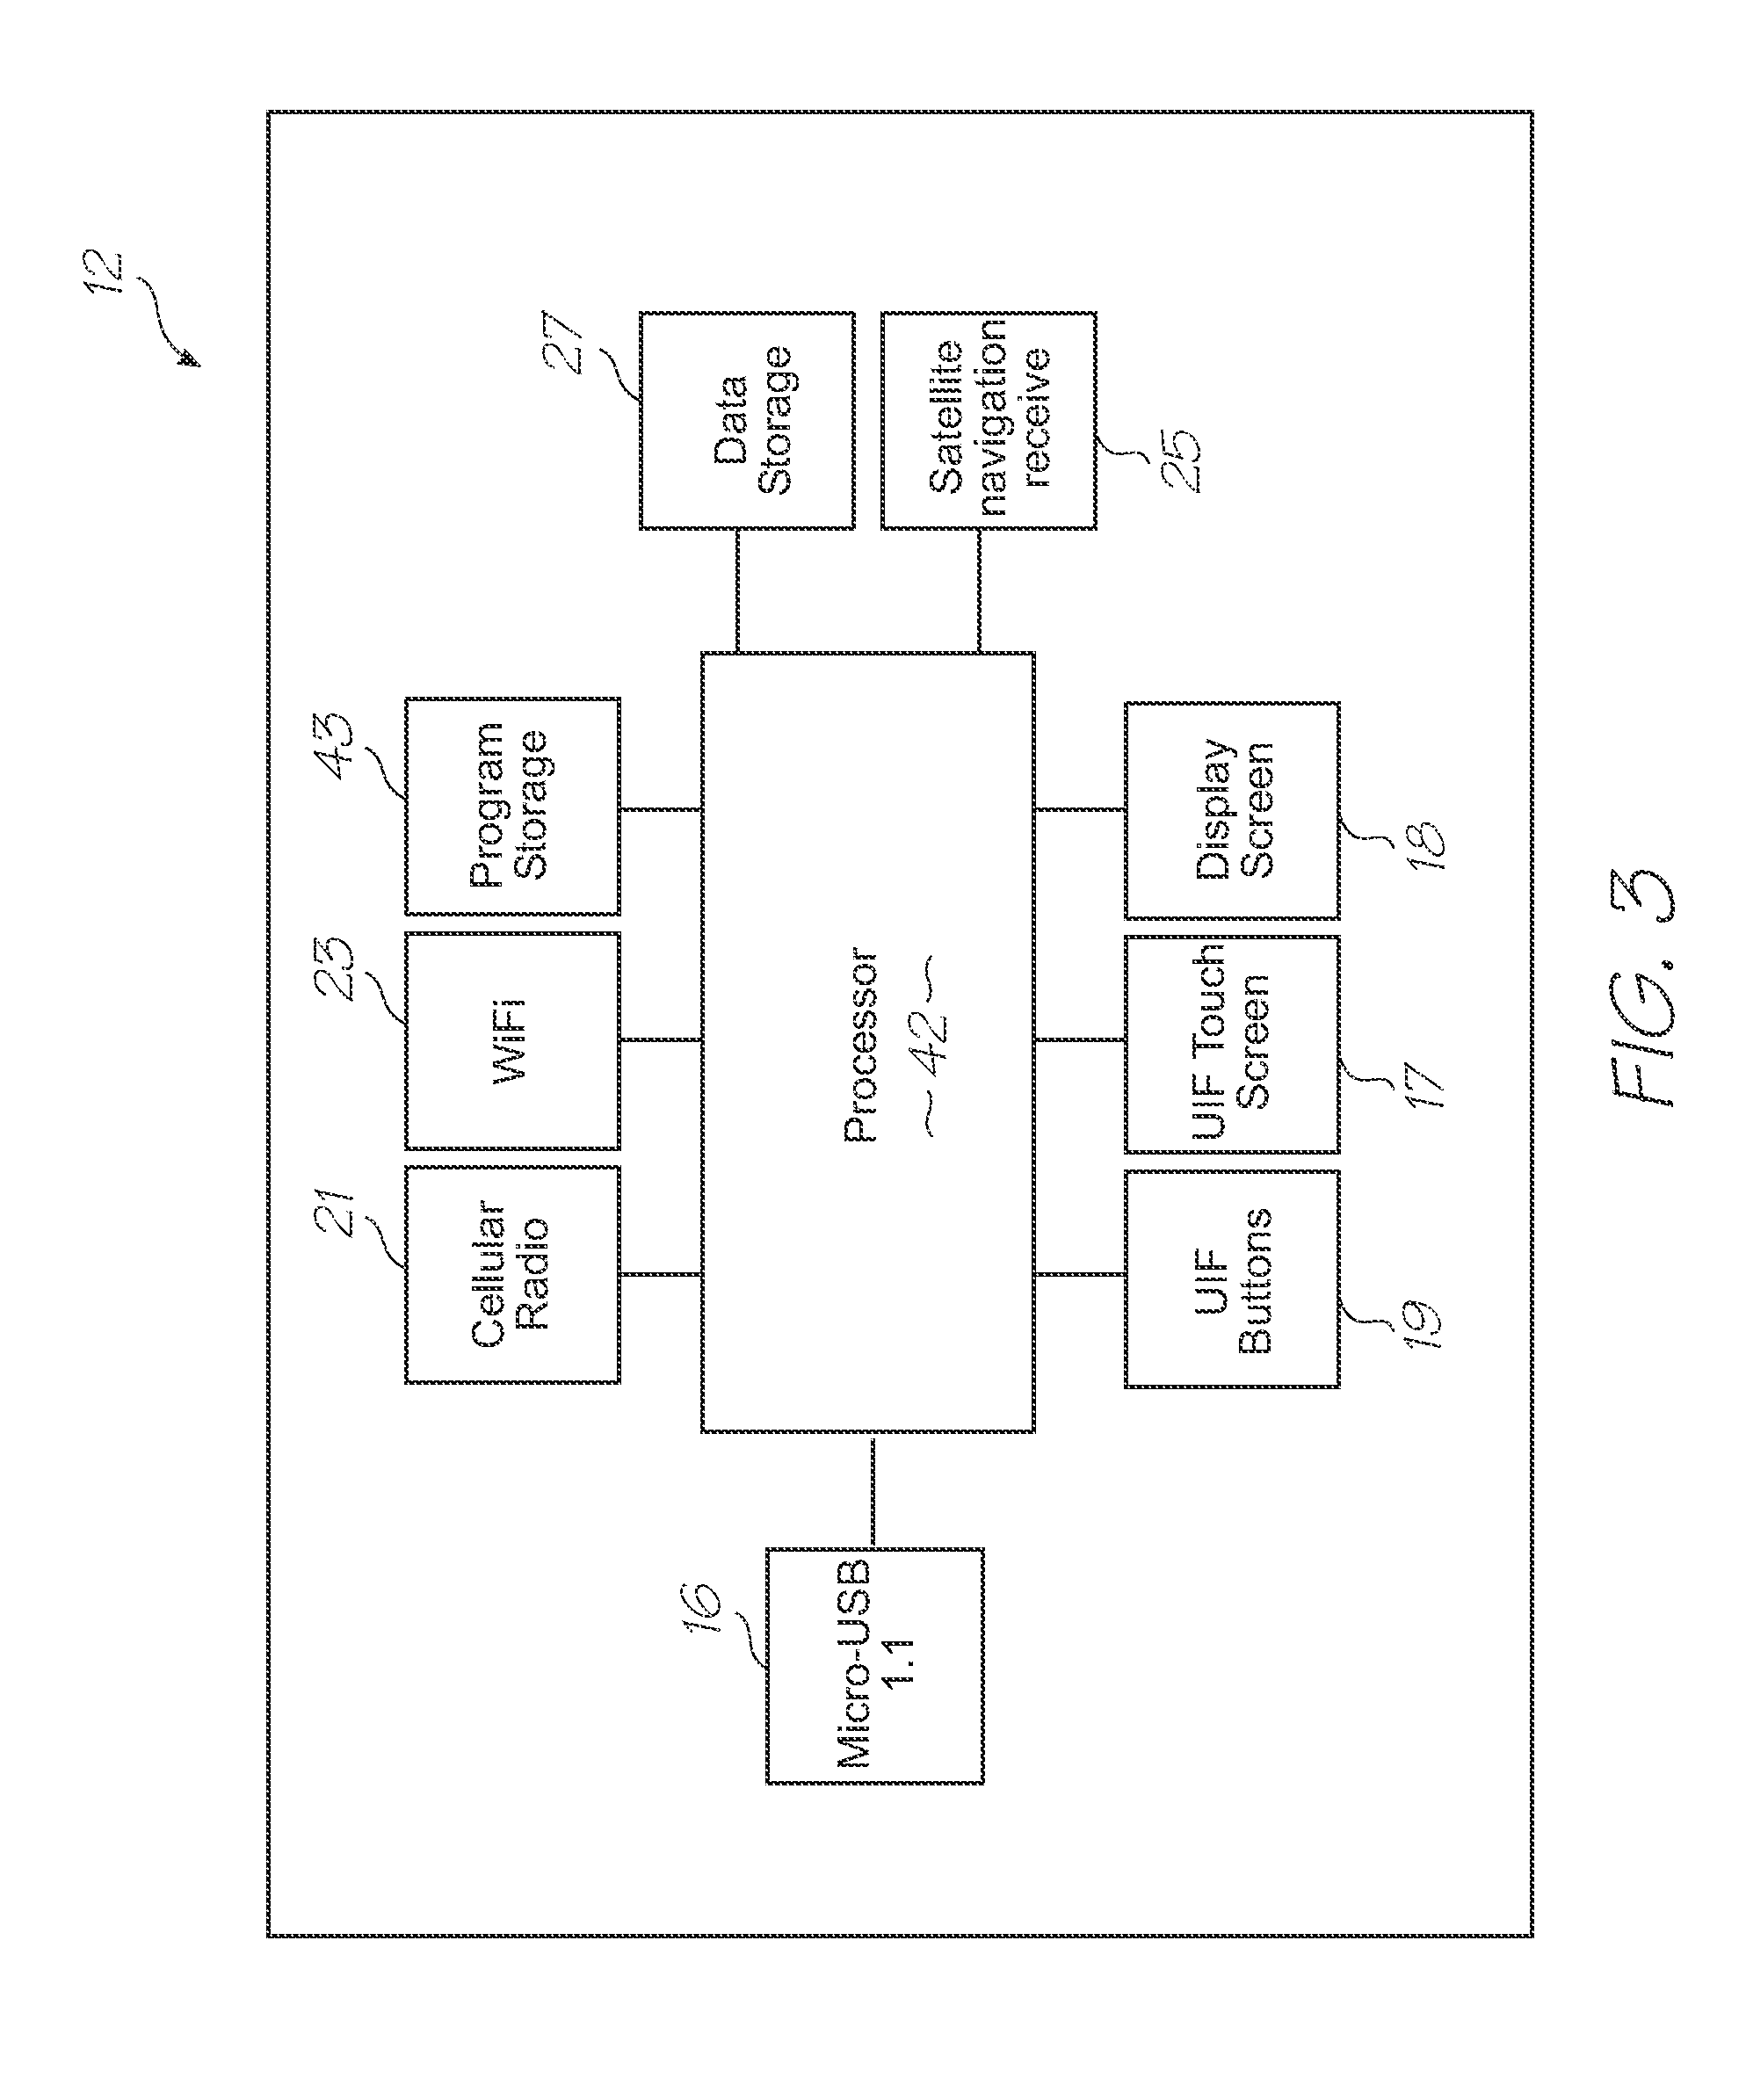 Dialysis device with multi-layer structure